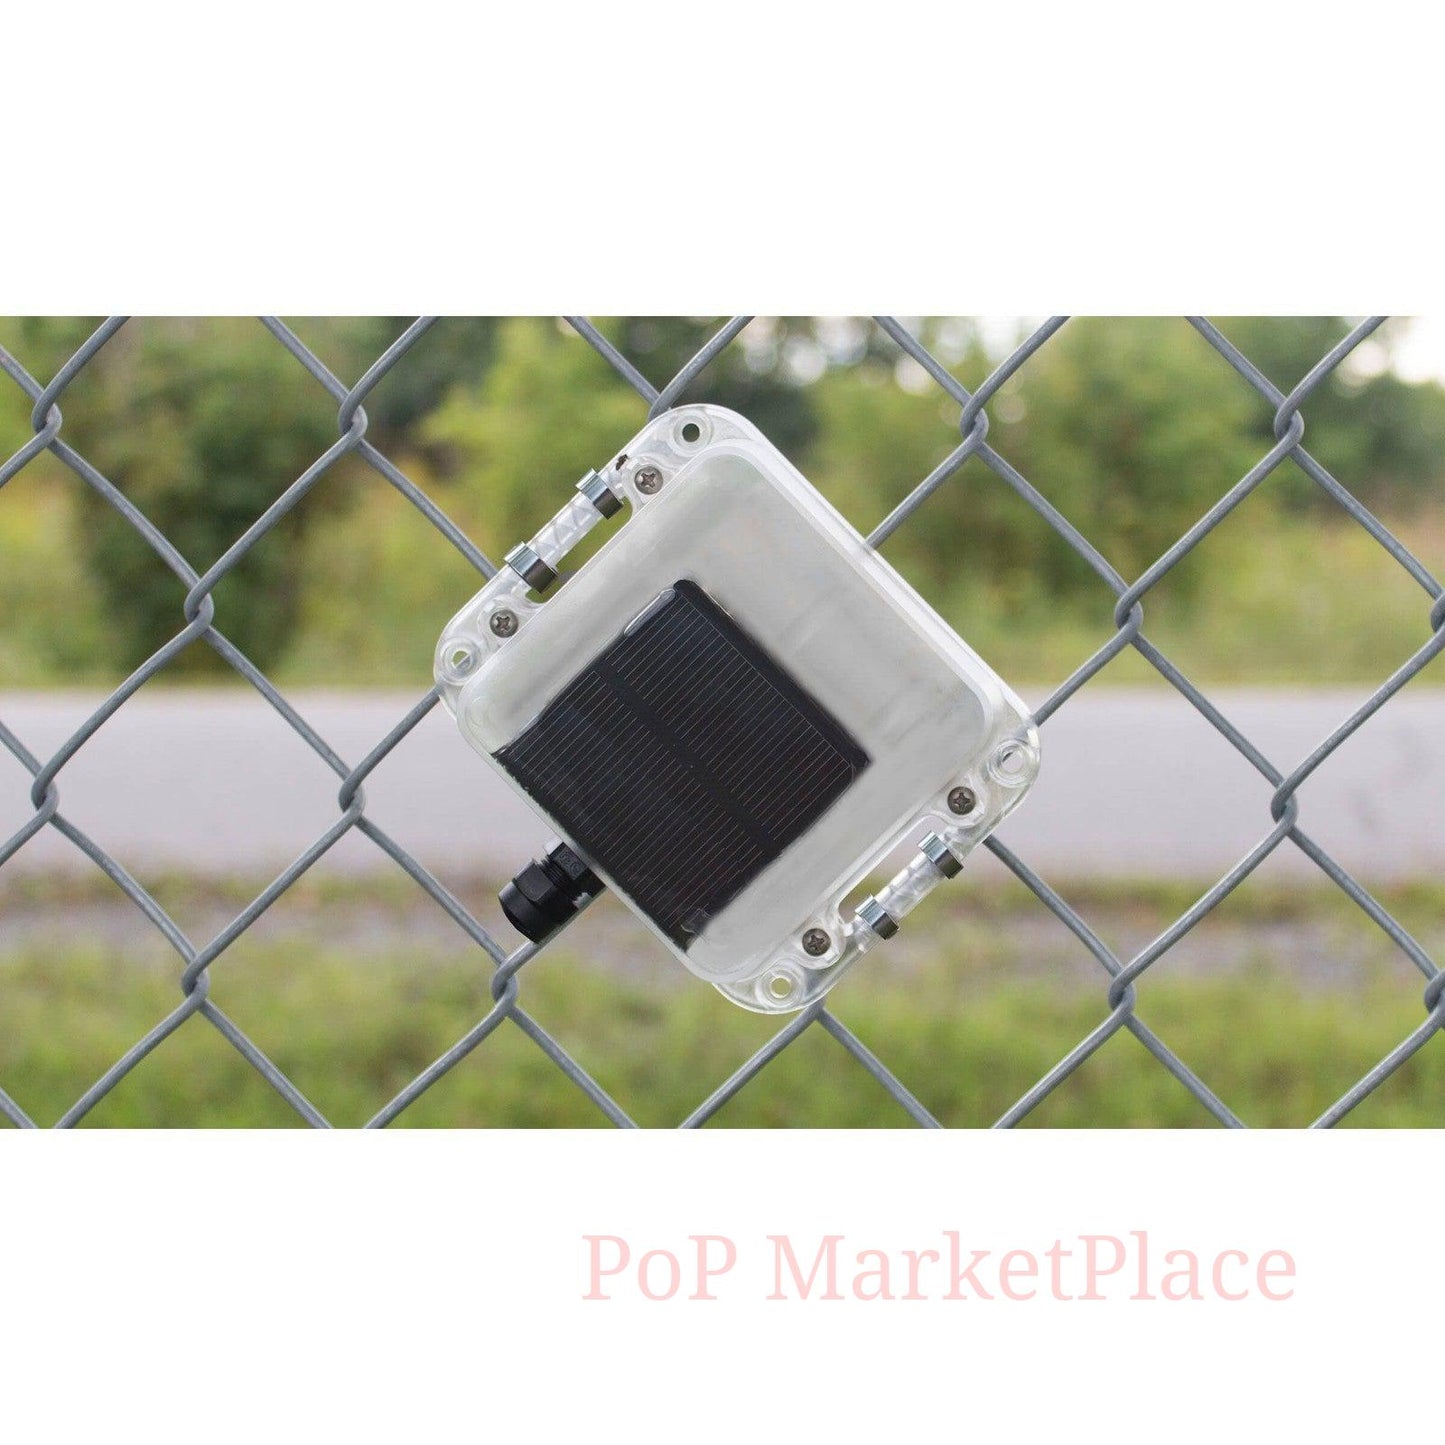 FENCETECH: SuperSensor Fence Mounted Perimeter Intrusion Detection System Globalgroup-defense